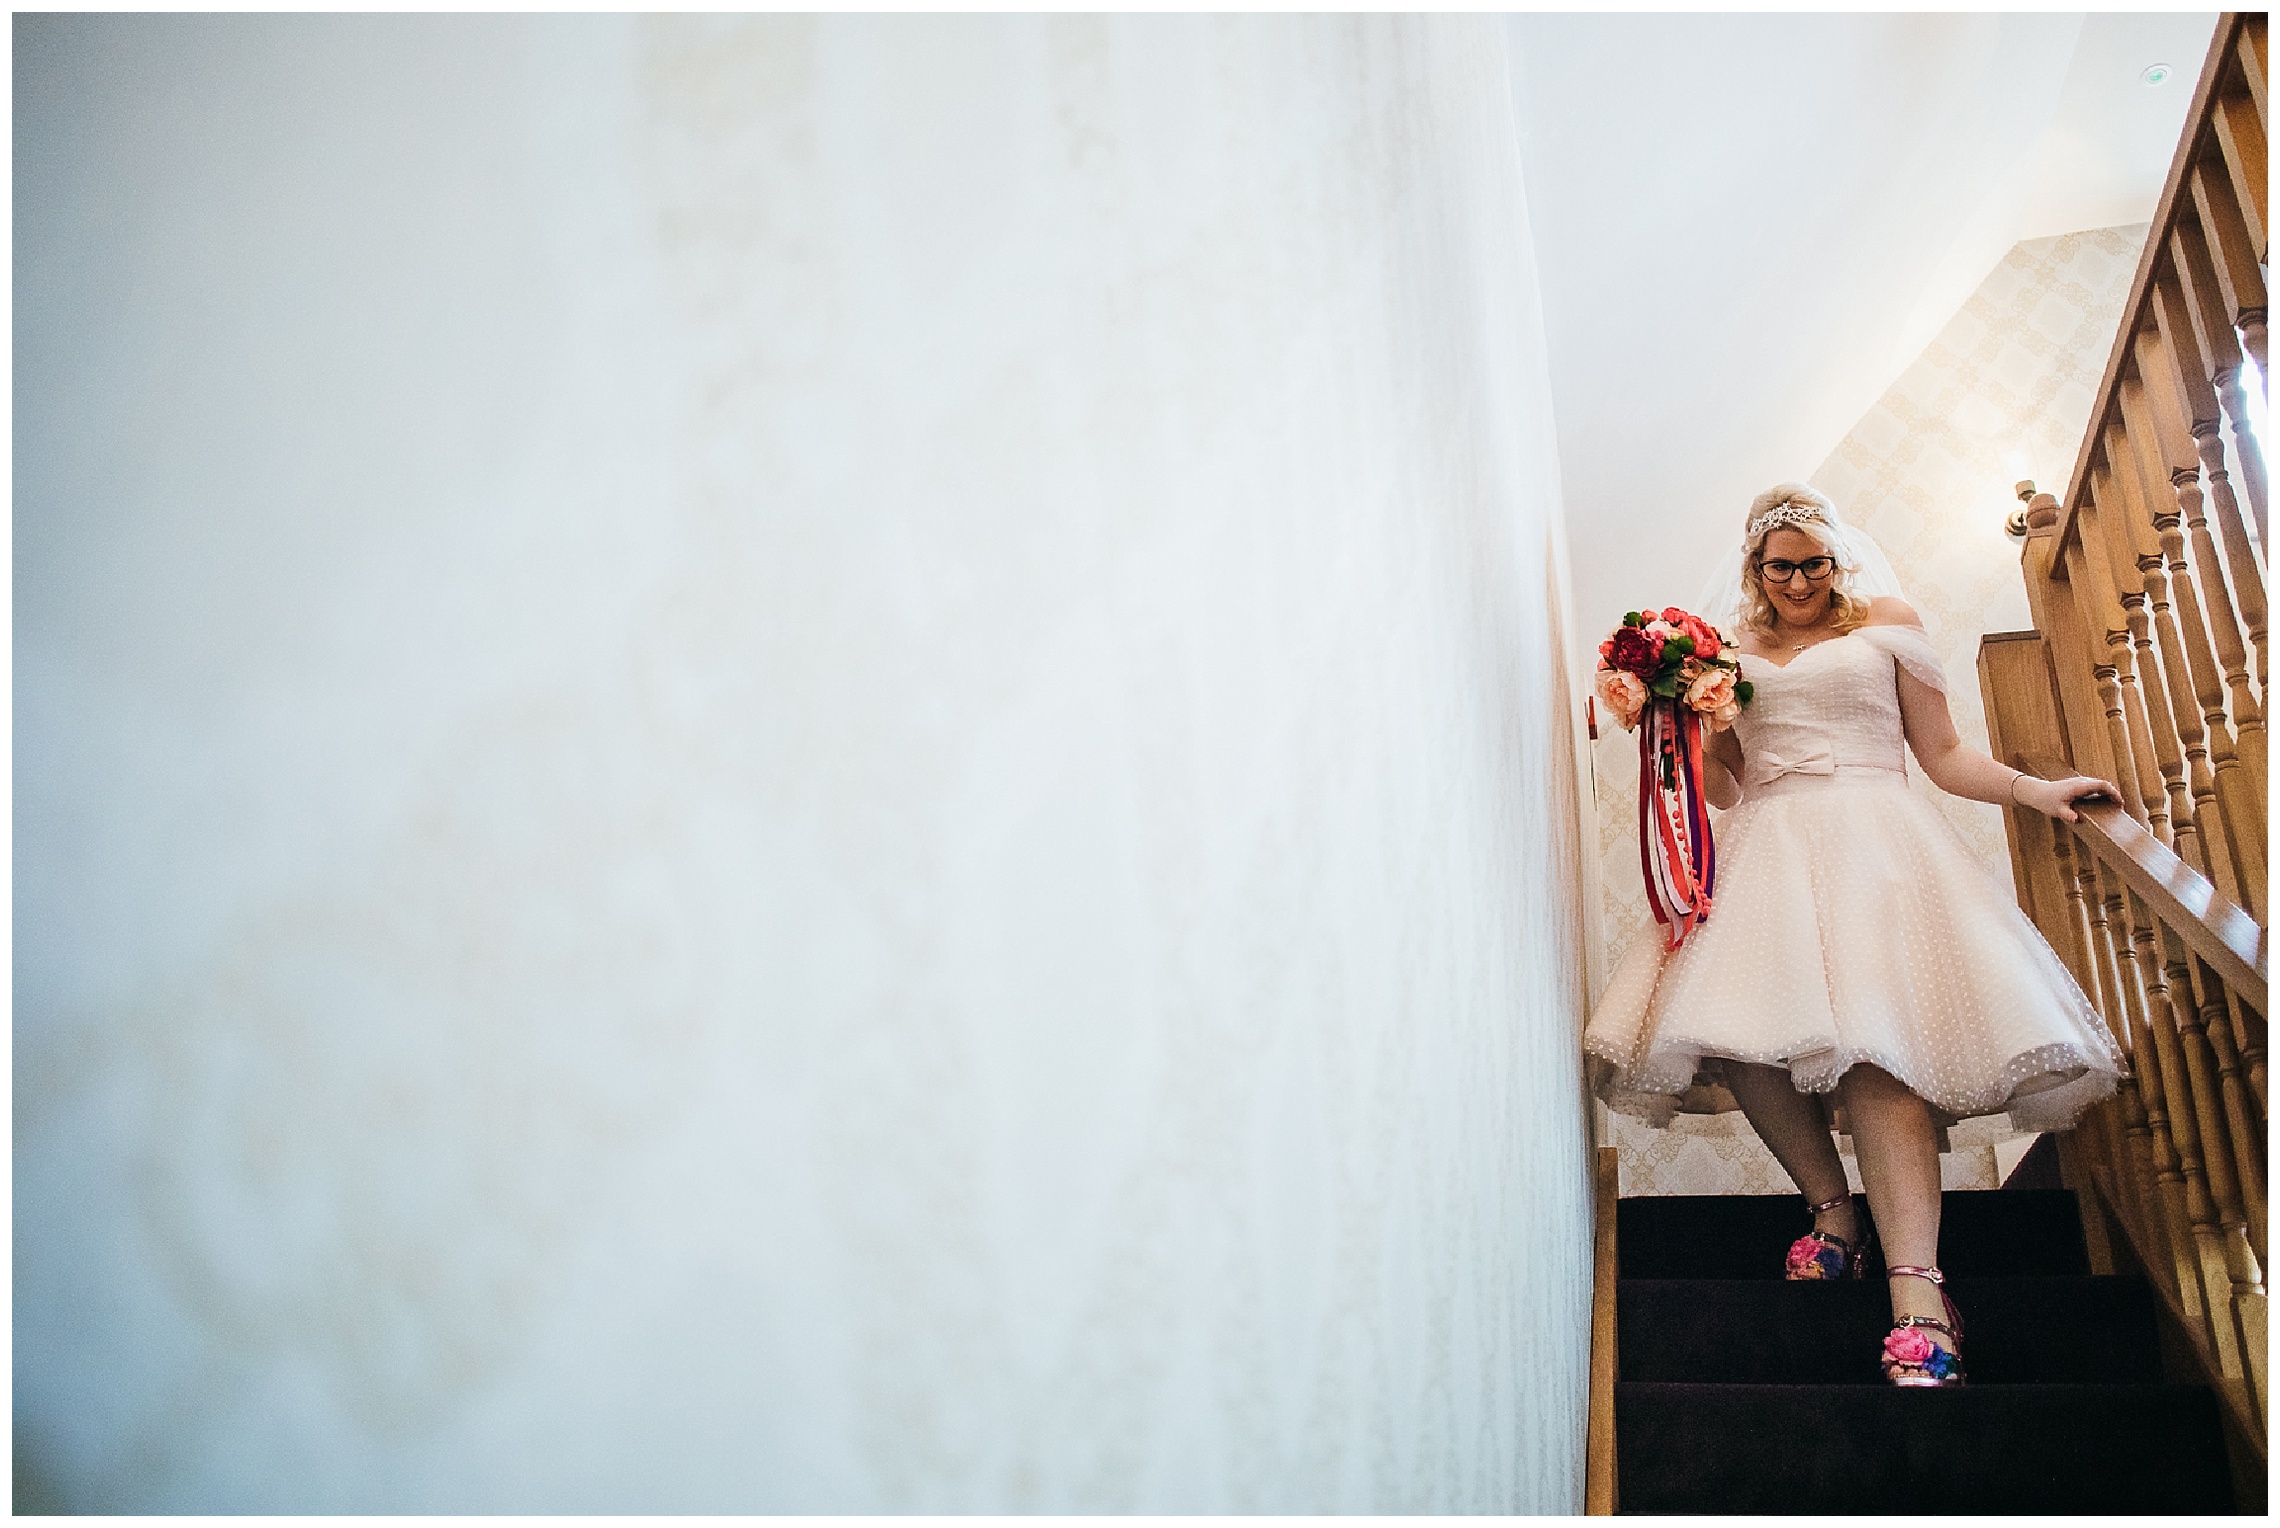 bride in short wedding dress and pink shoes descends stairs in bridal boudoir